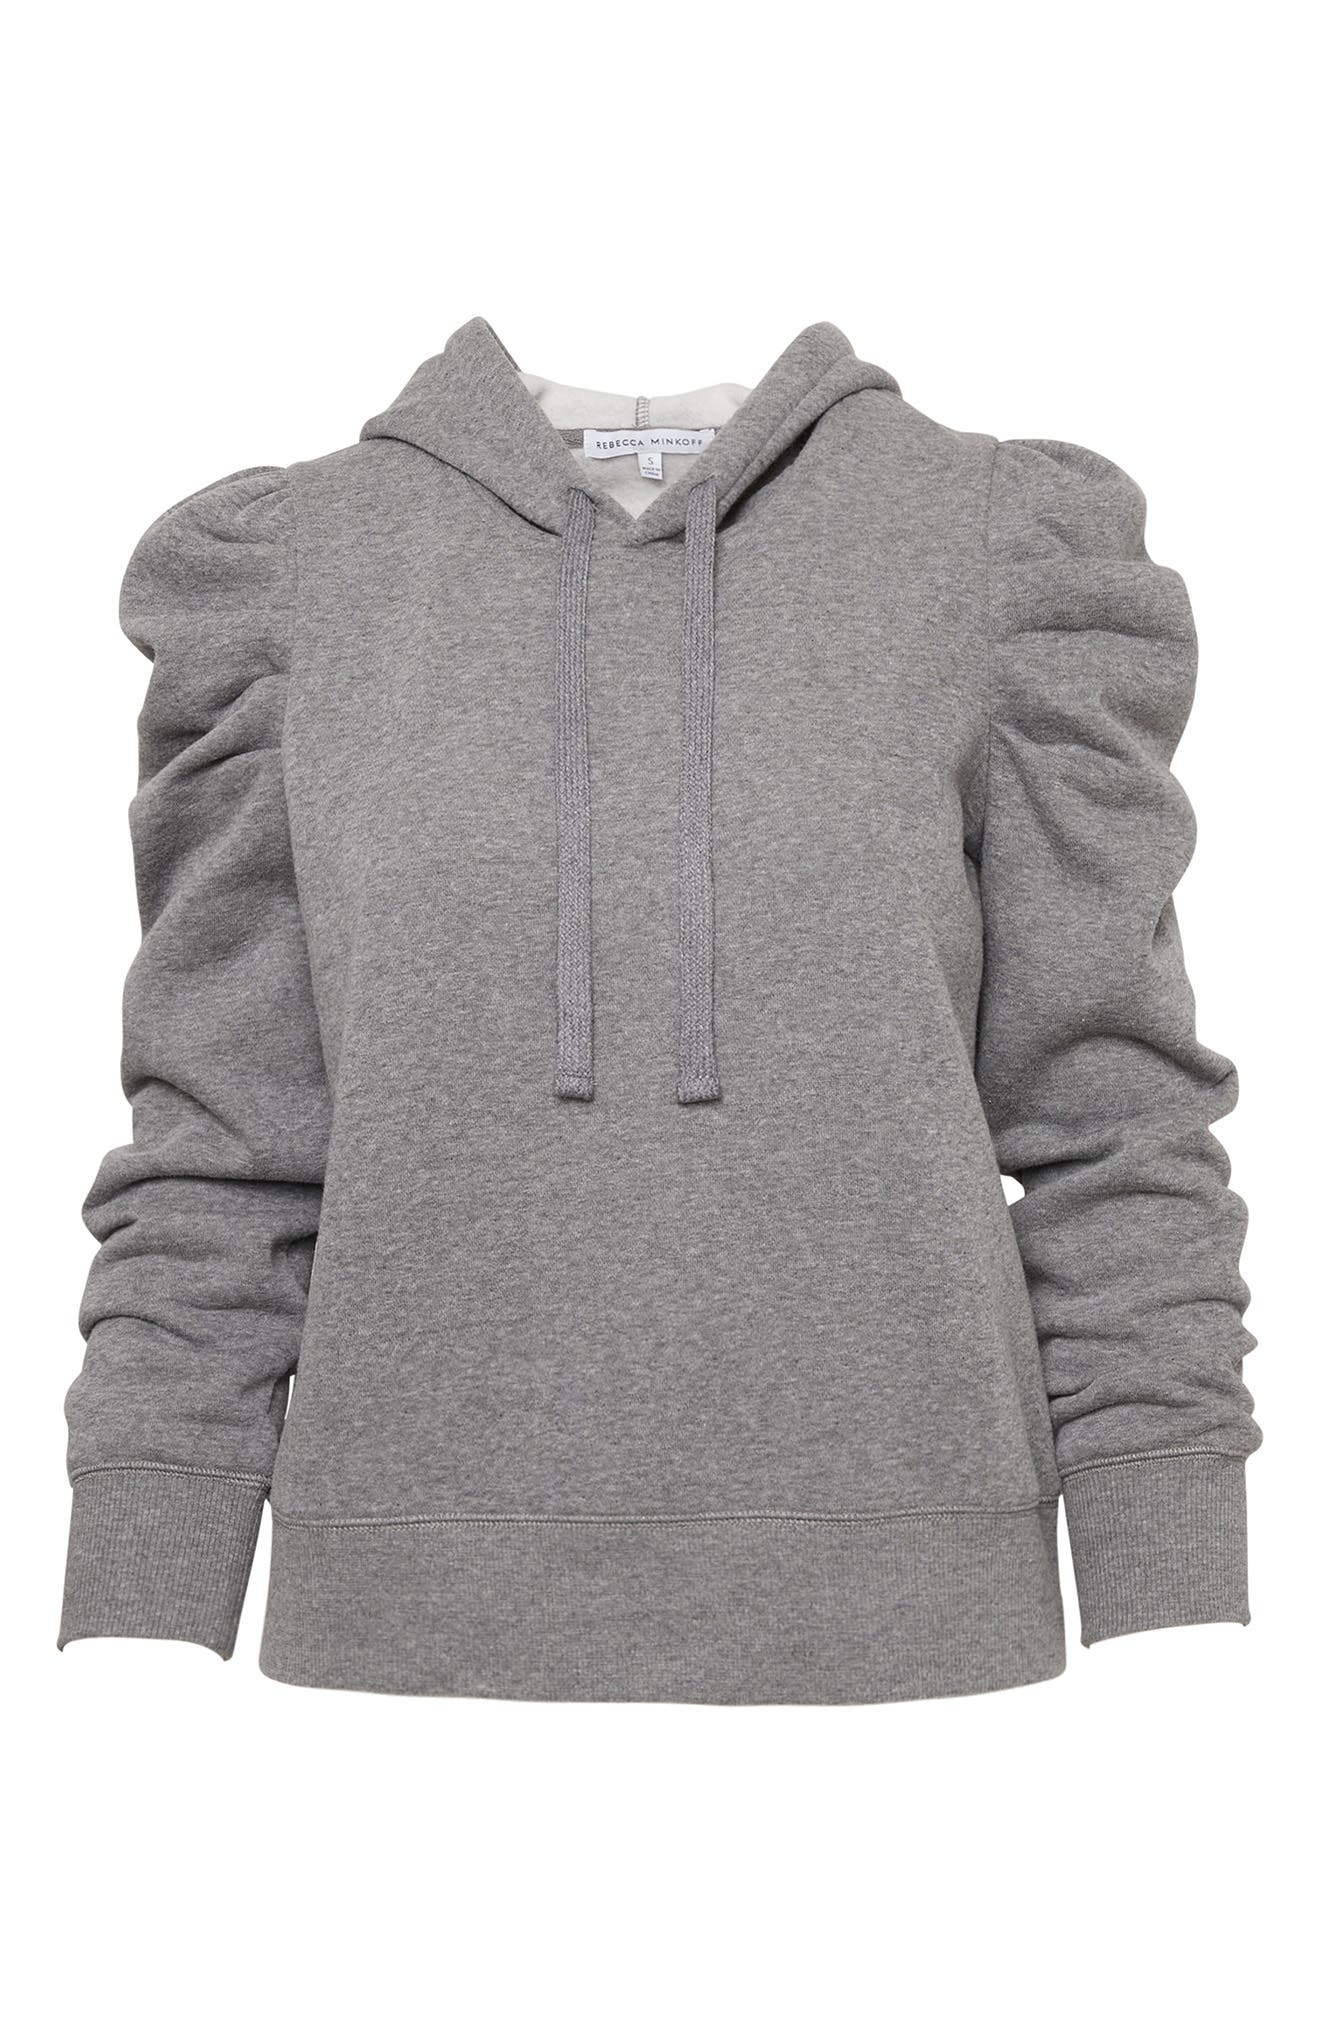 Rebecca Minkoff Janine Hoodie in Medium Heather Grey at Nordstrom, Size X-Small